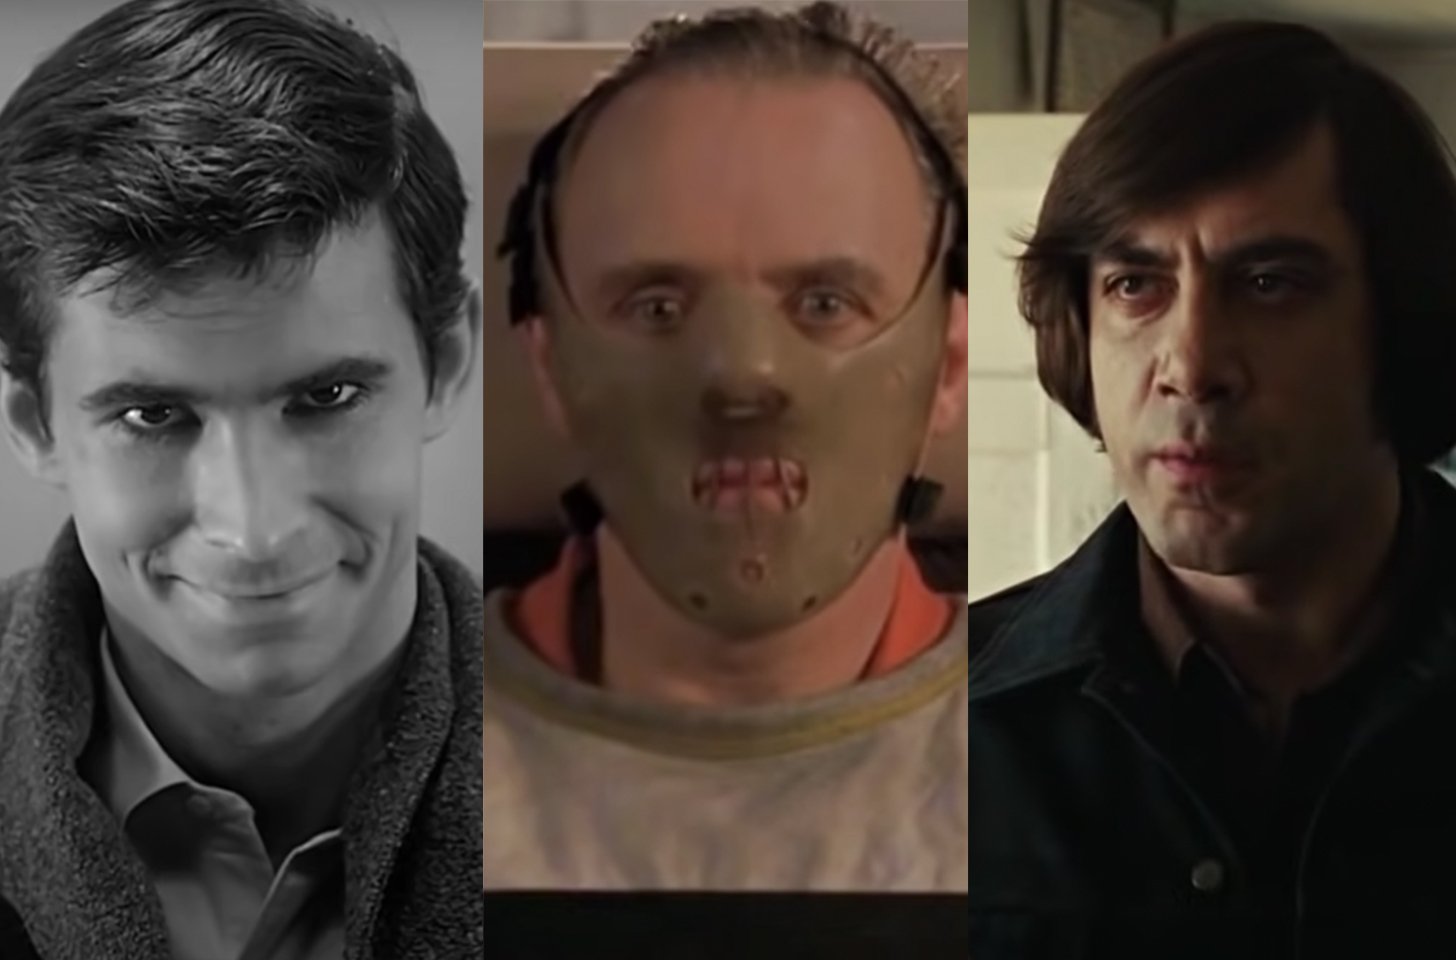 Who Do You Think Is The Best Portrayal Of A Psychopath In Film?